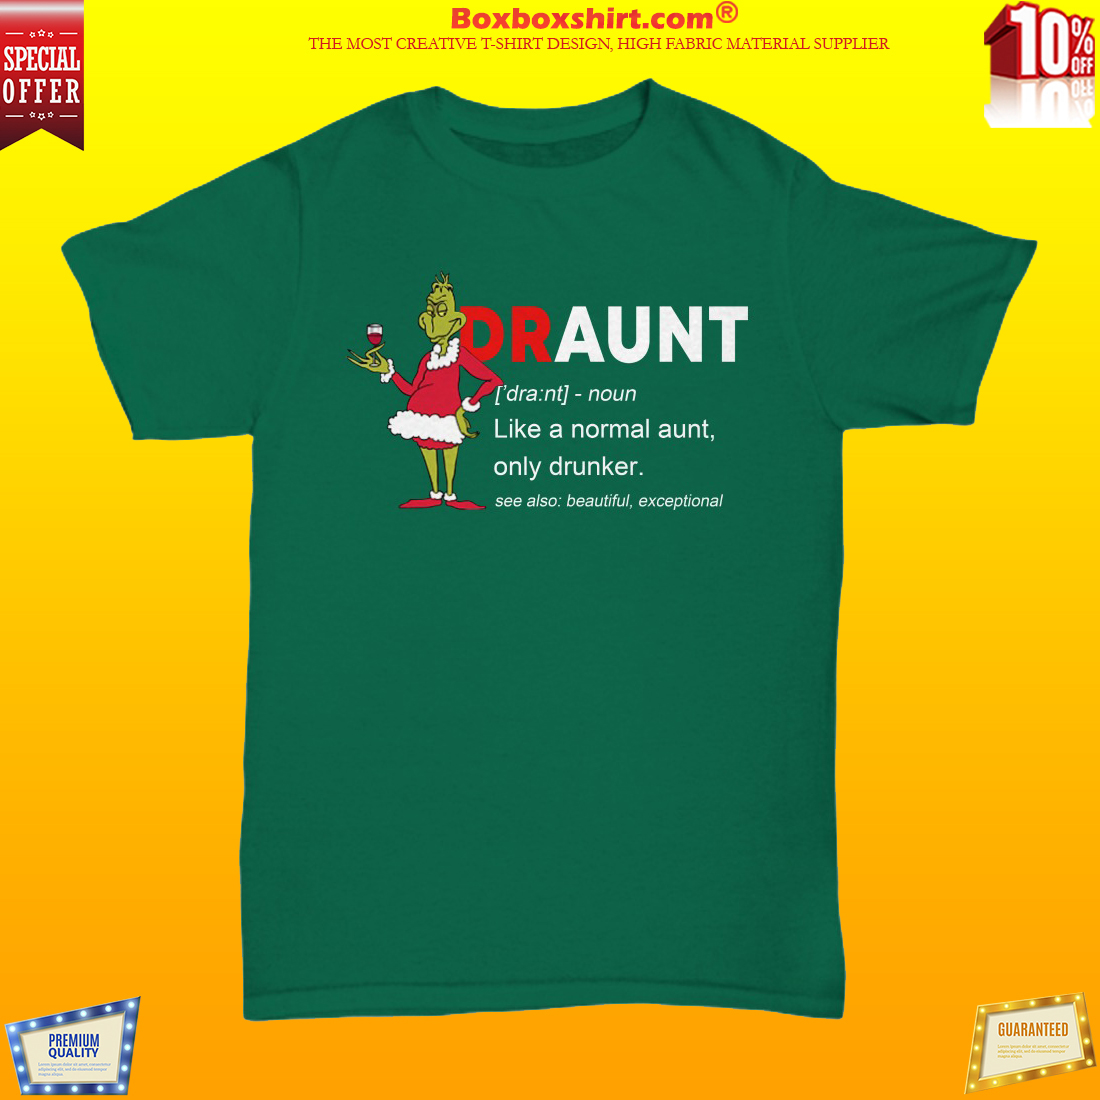 Draunt meaning like normal aunt only drunker shirt